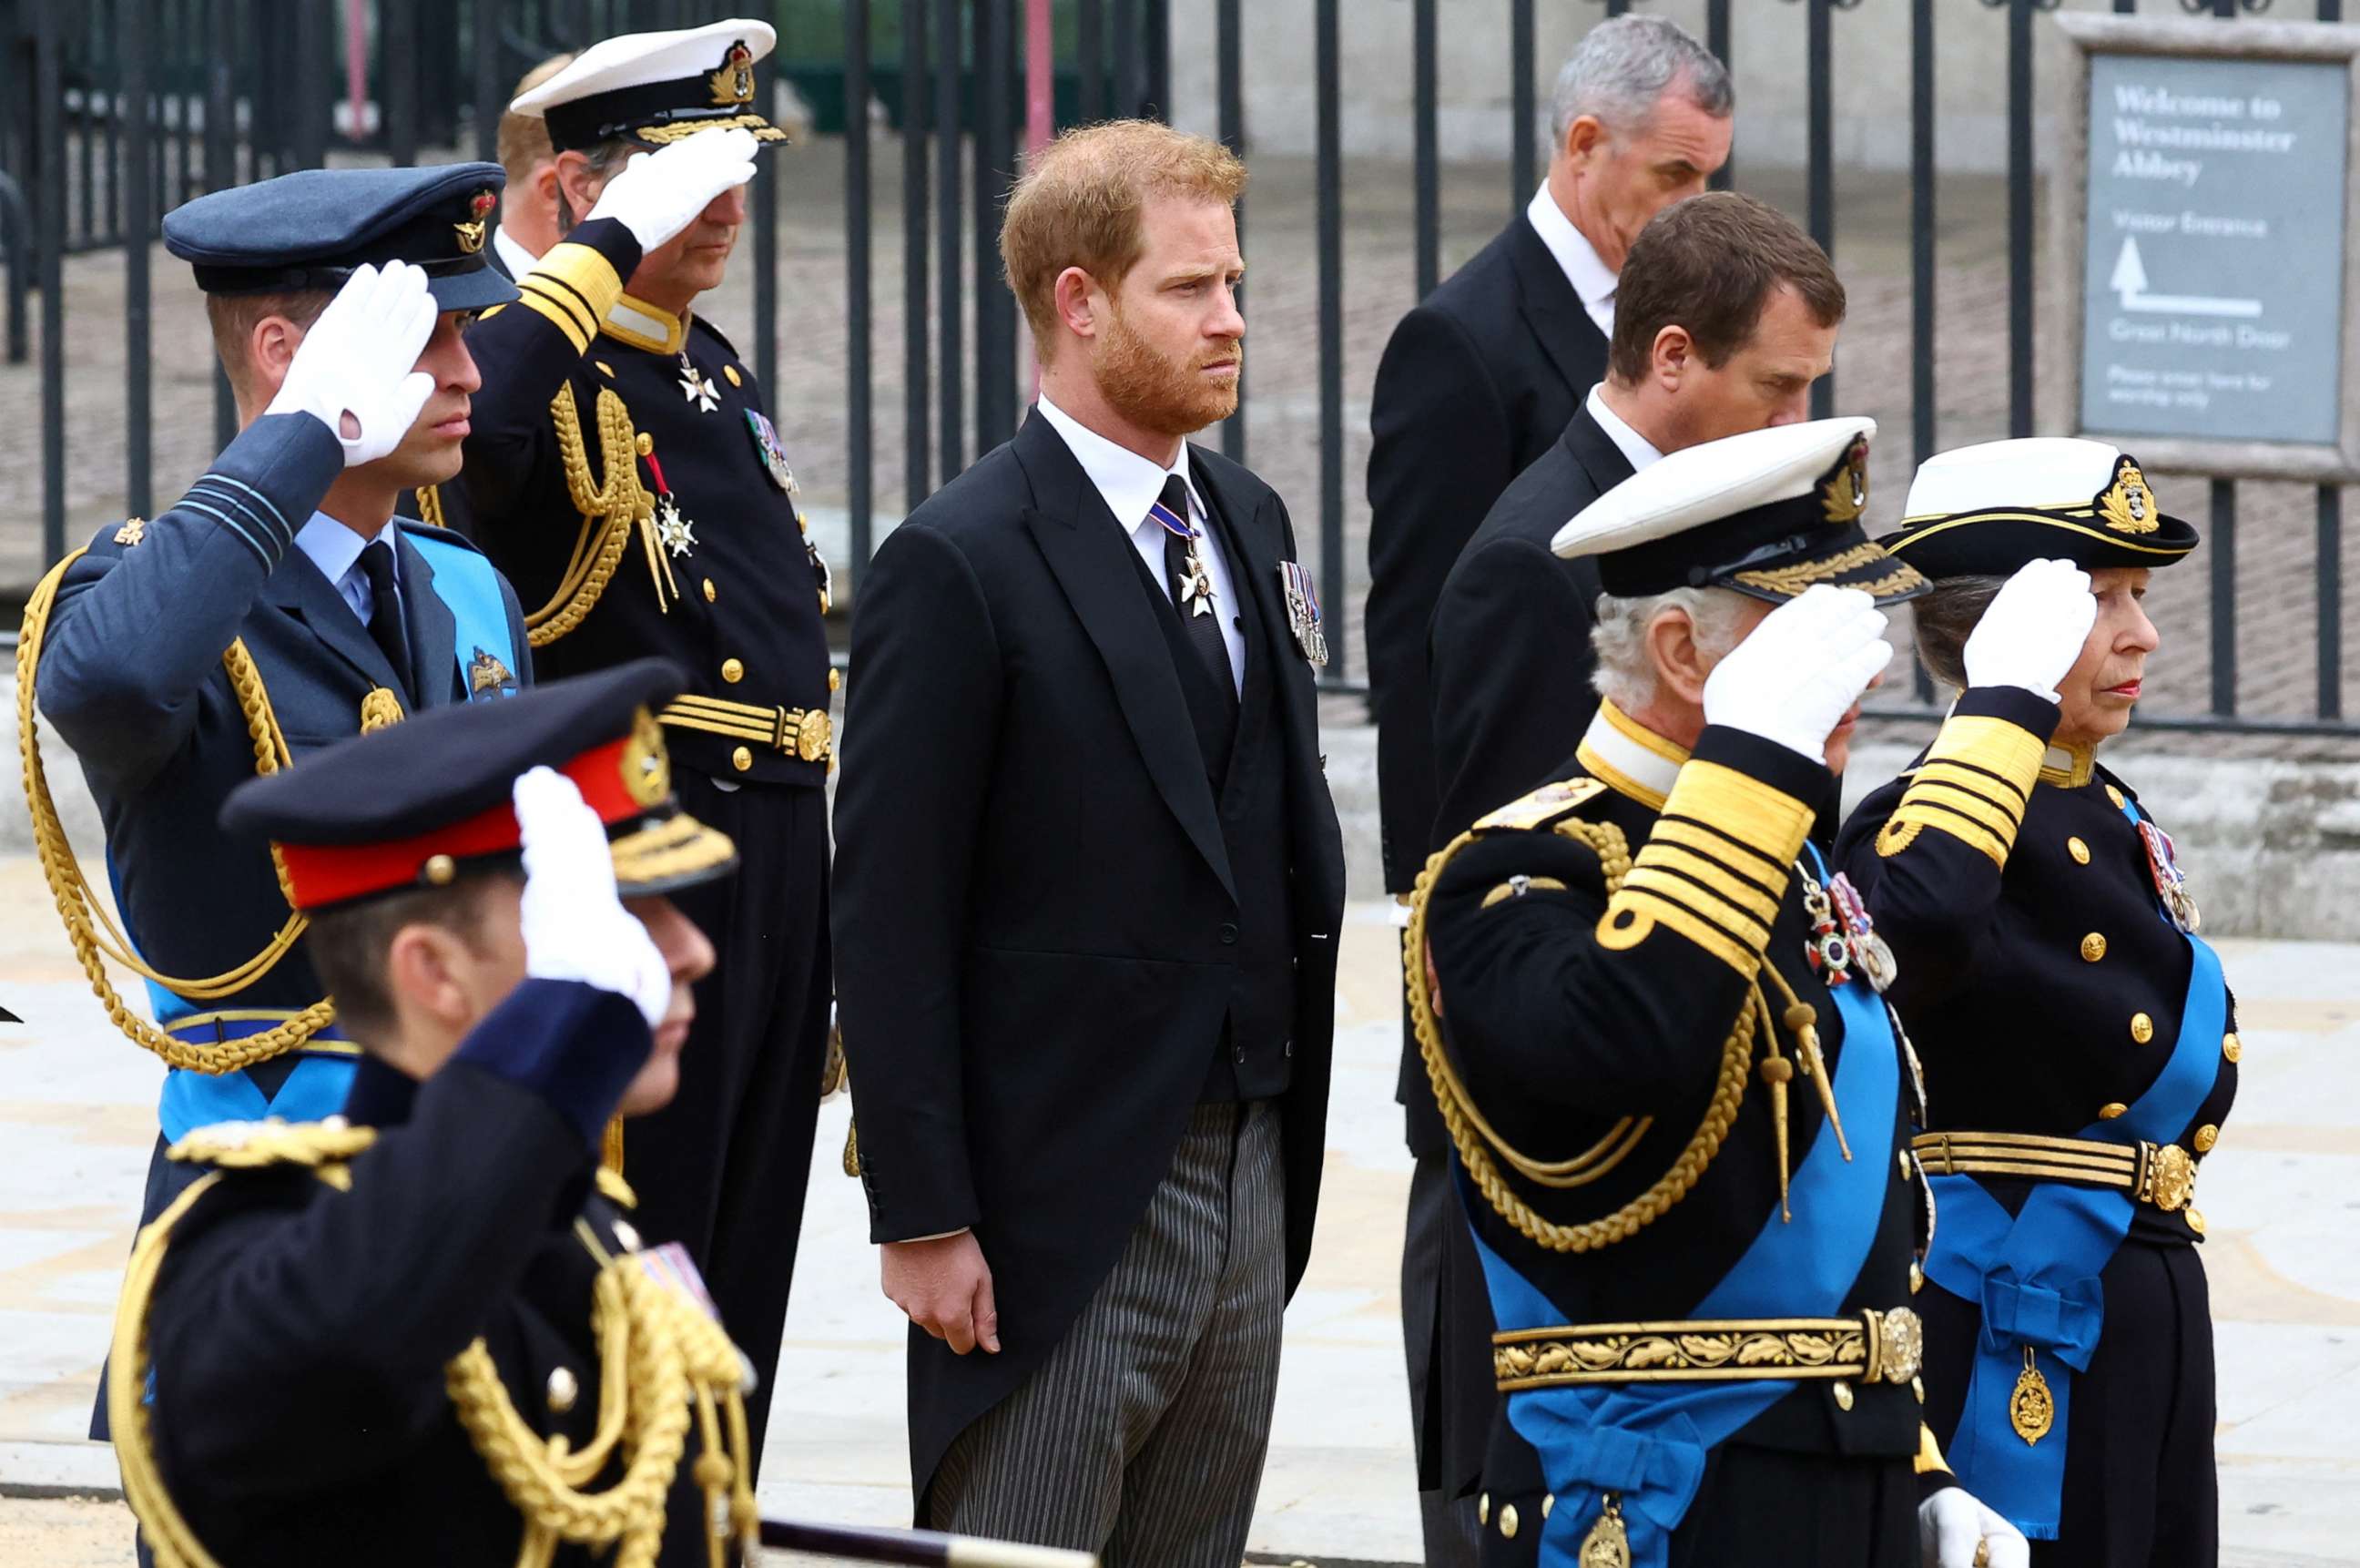 PHOTO: Prince Harry, Duke of Sussex, stands next to King Charles, Anne, Princess Royal, and William, Prince of Wales, as they salute during the state funeral and burial of Britain's Queen Elizabeth, in London, Sept. 19, 2022.